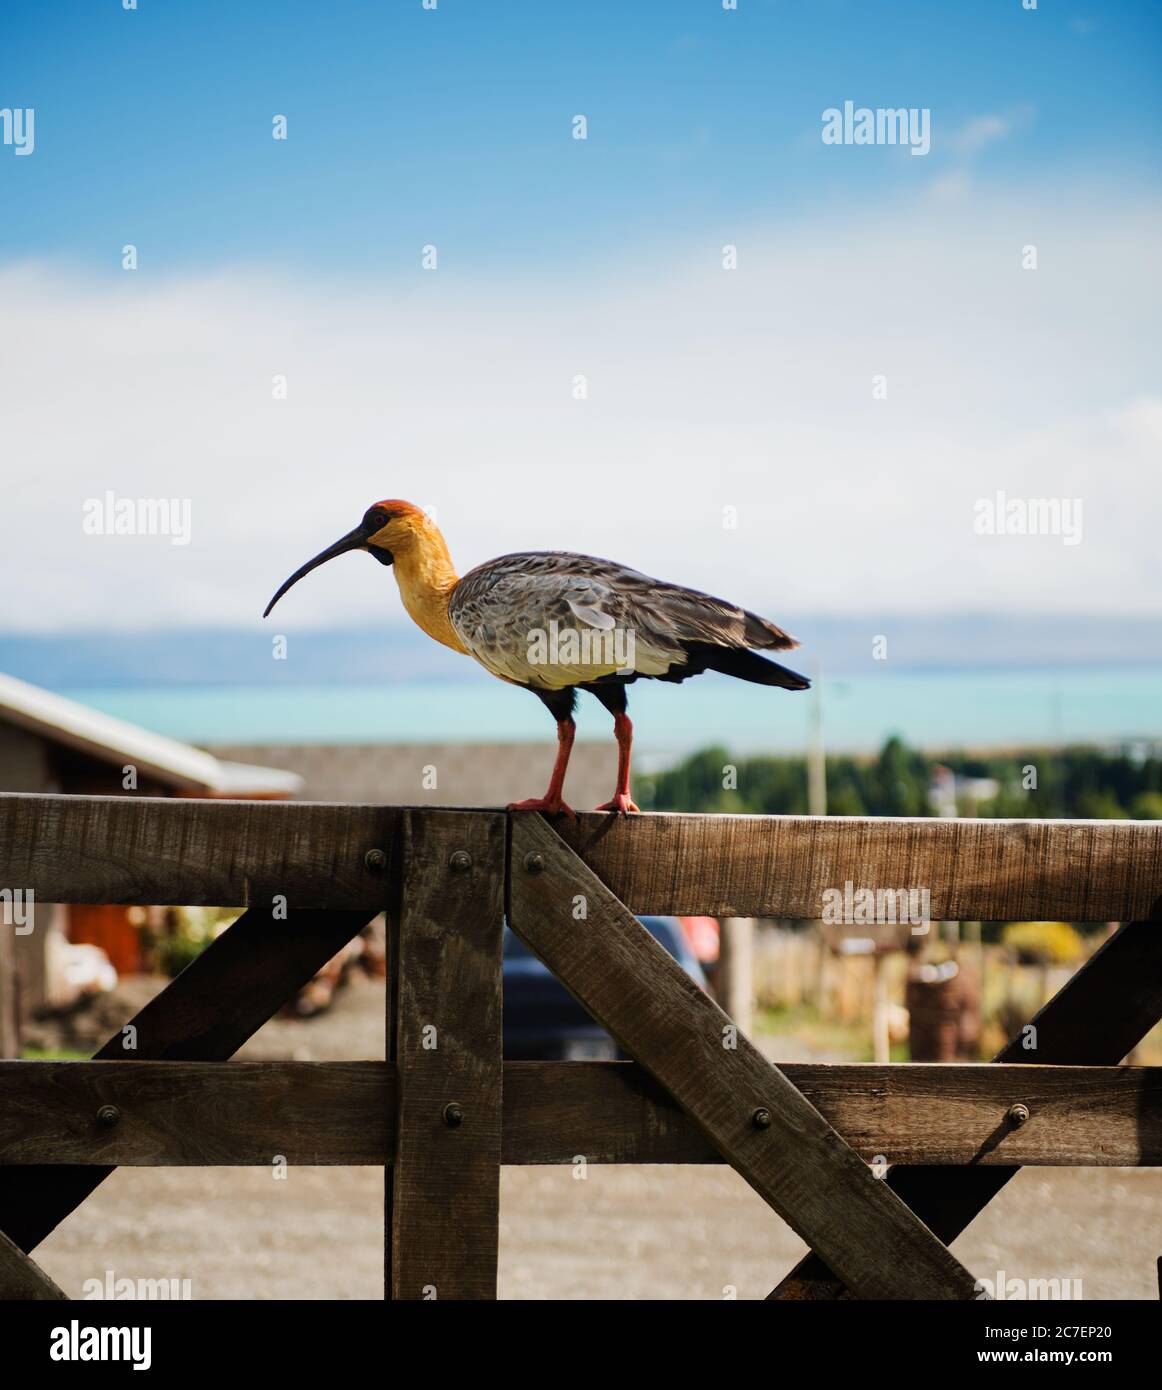 Black-faced Ibis in the town of  El Calafate, Argentina, South America Stock Photo